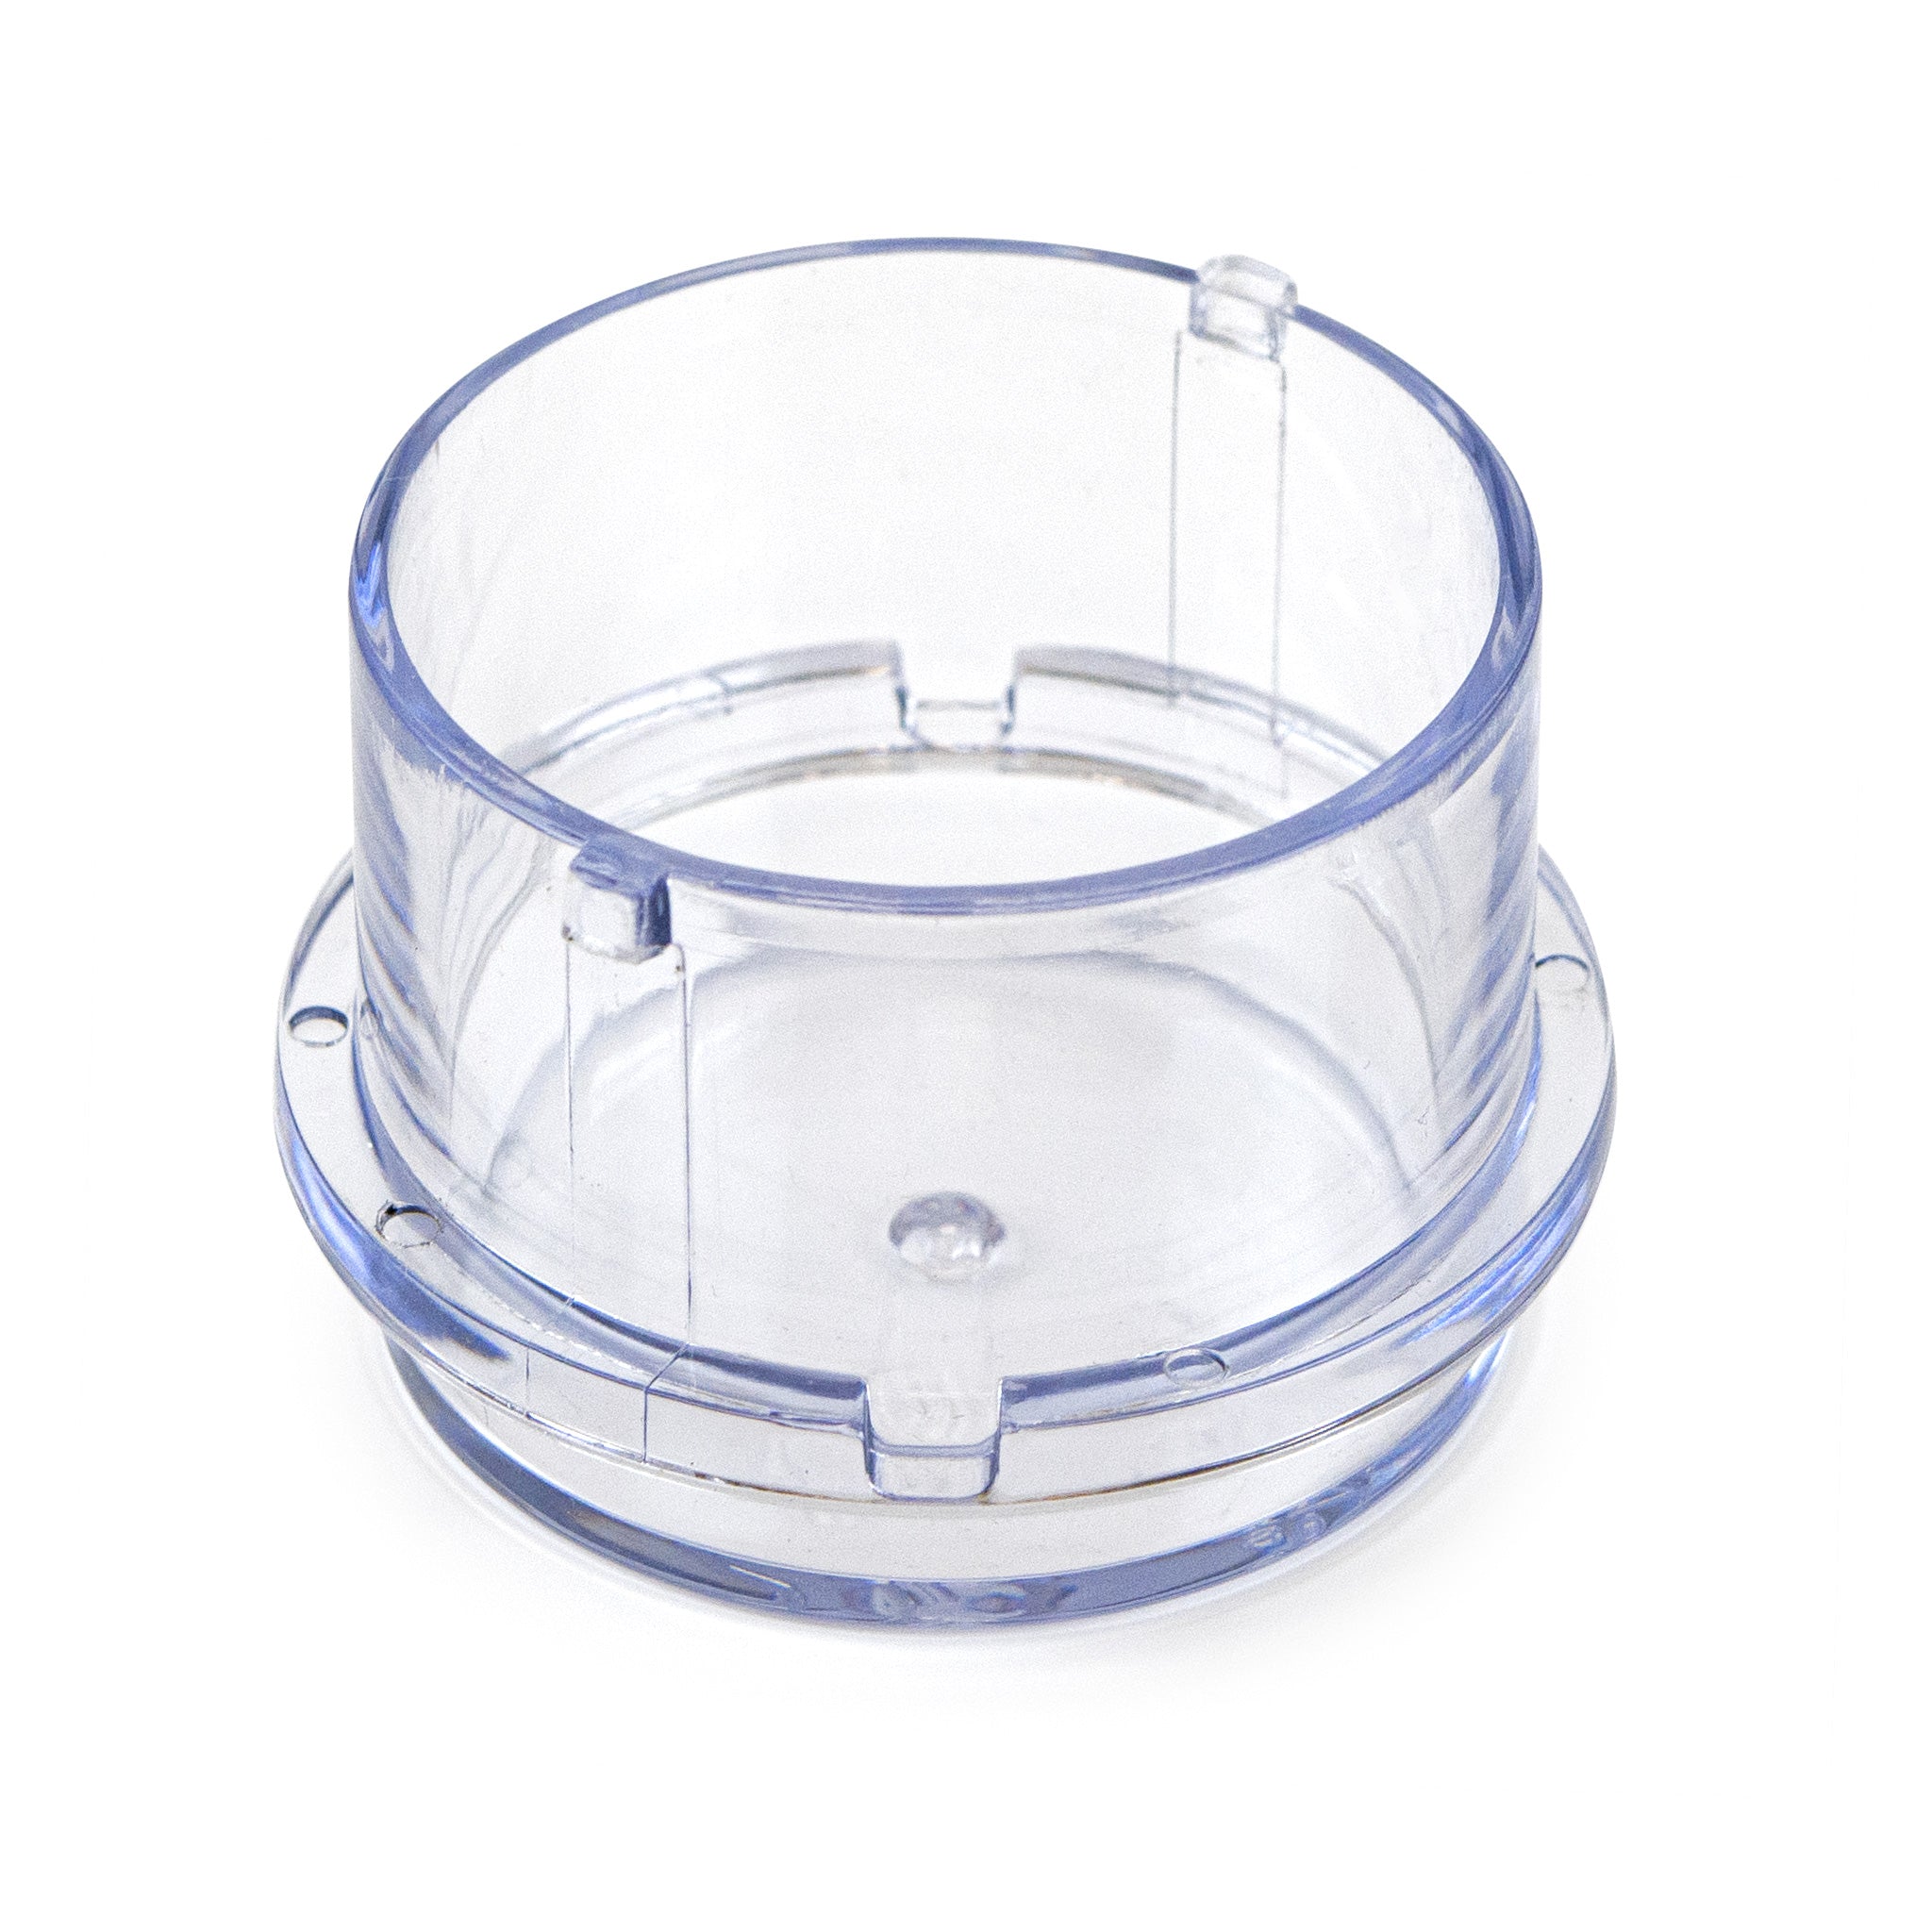 Tribest Dynablend Lid Cap Plug compatible with Dynablend Blender (DB-950-A and DB-850-A